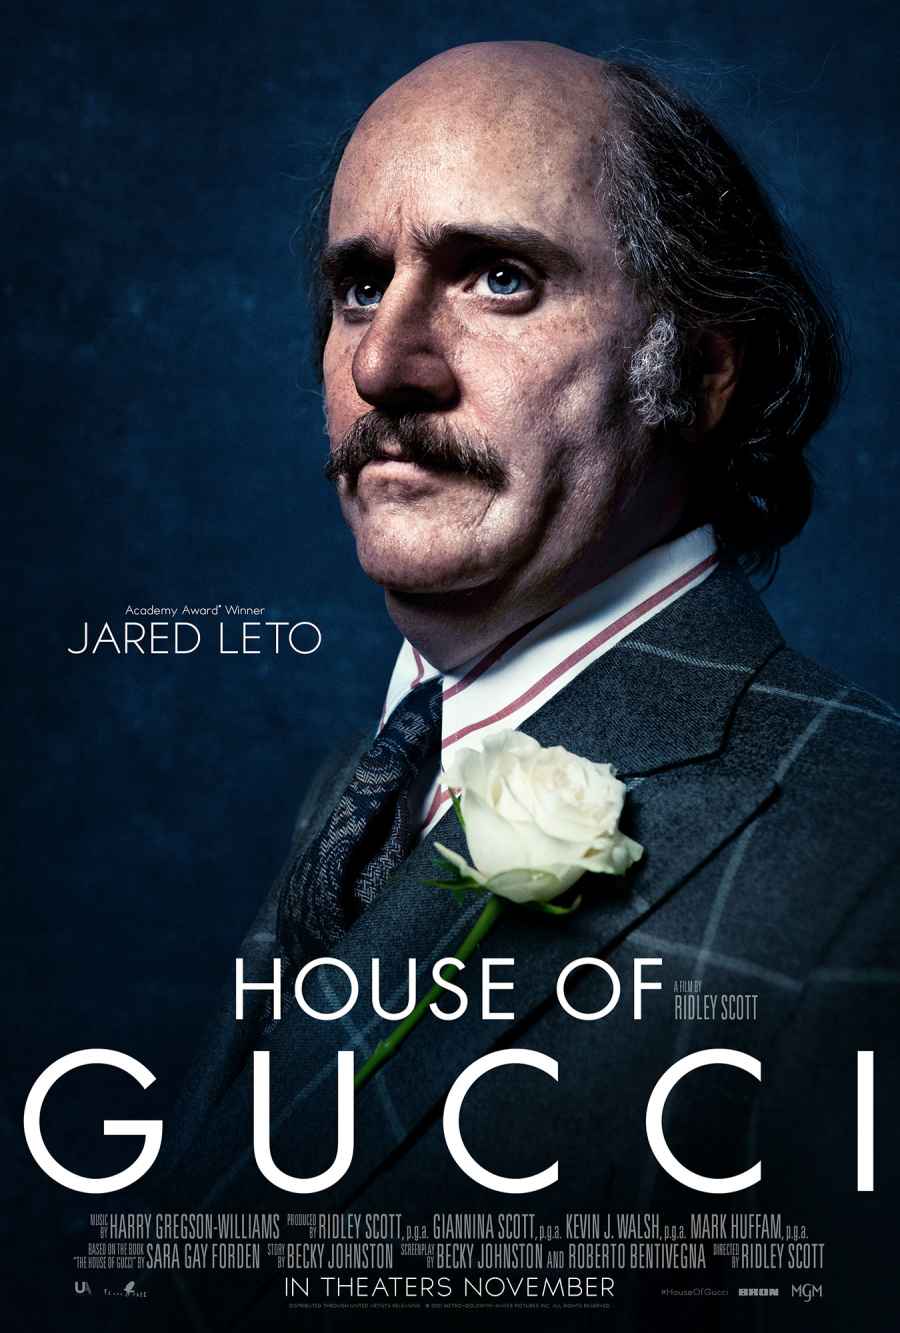 House of Gucci Character Poster Jared Leto